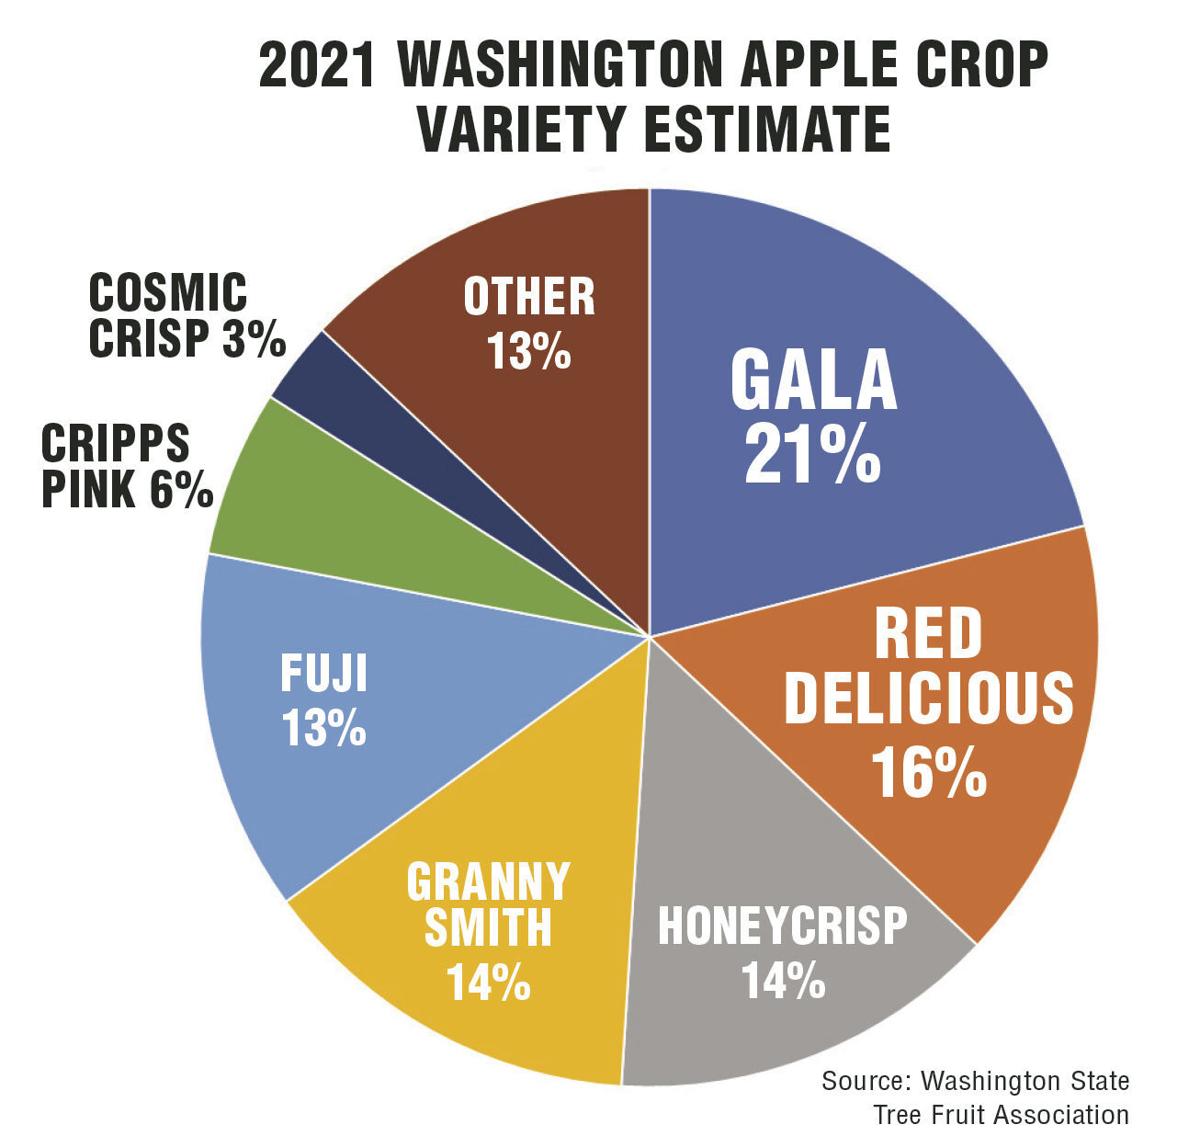 Apple variety estimate for Washington state in 2021